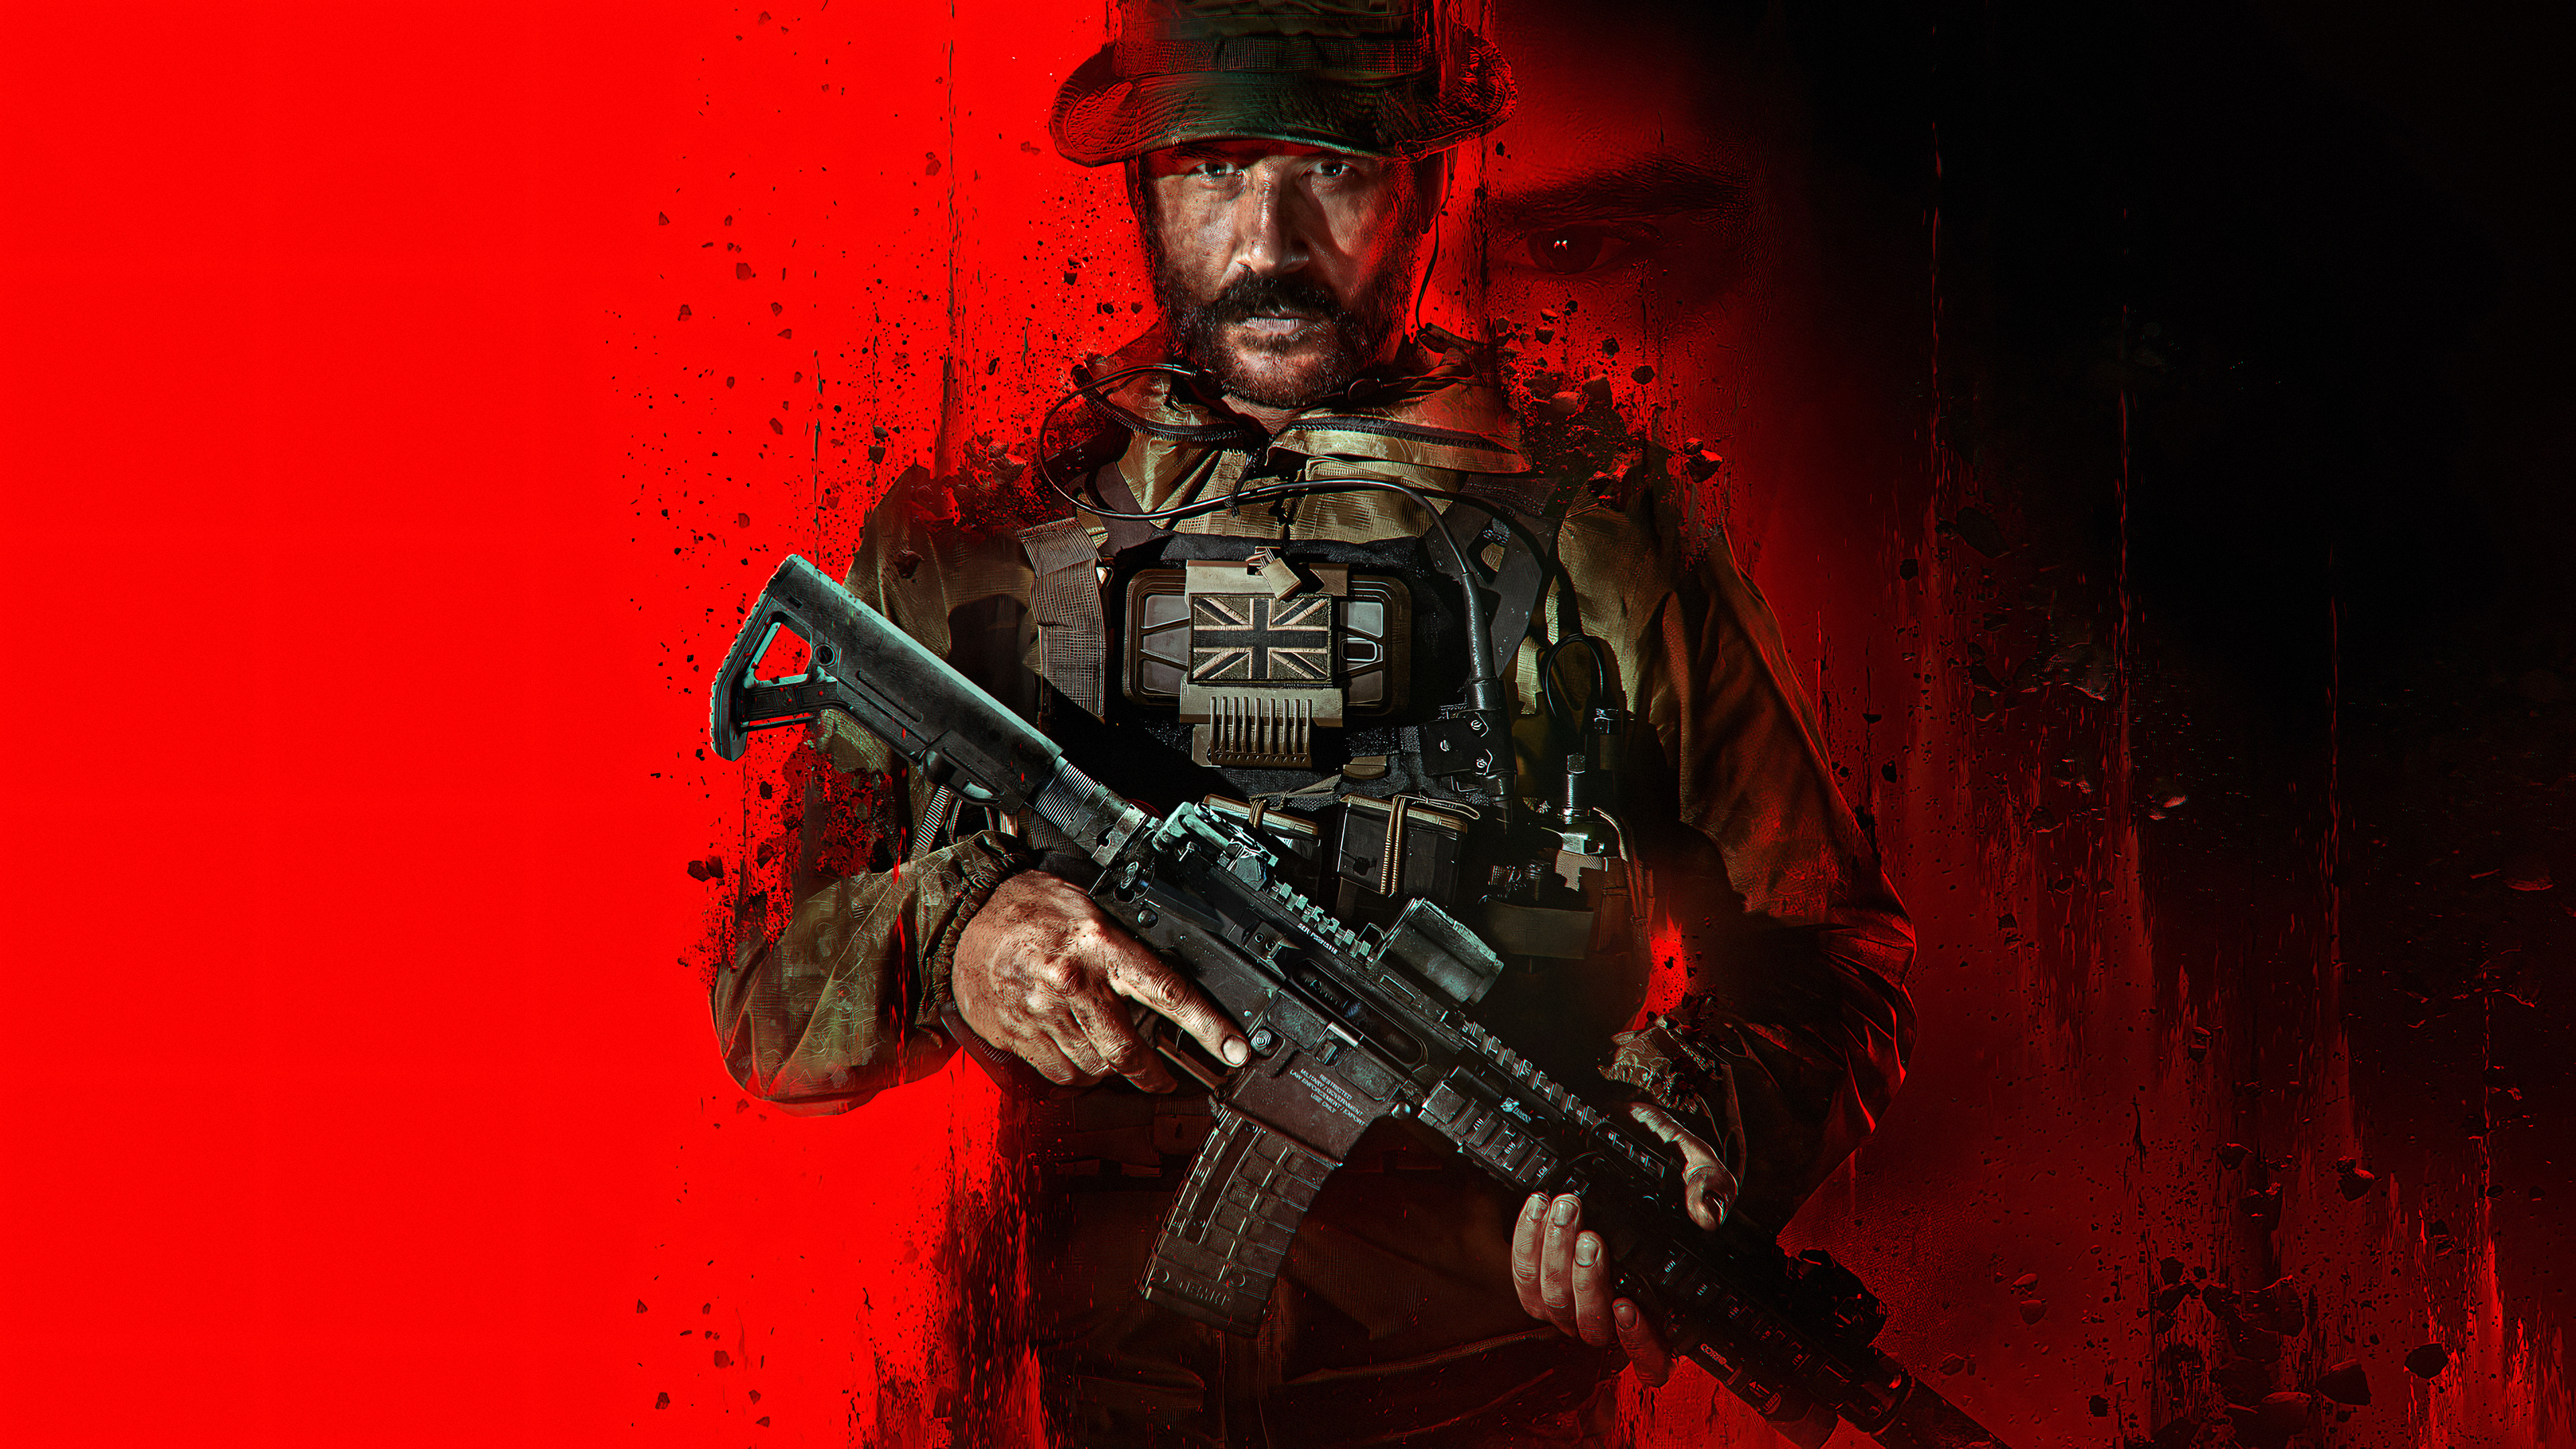 General 3840x2160 Call of Duty: Modern Warfare III Sledgehammer Games 4K Activision video games Captain Price men Vladimir Makarov gun hat simple background looking at viewer beard Call of Duty: Modern Warfare boys with guns Call of Duty minimalism uniform Cheater Warfare video game characters